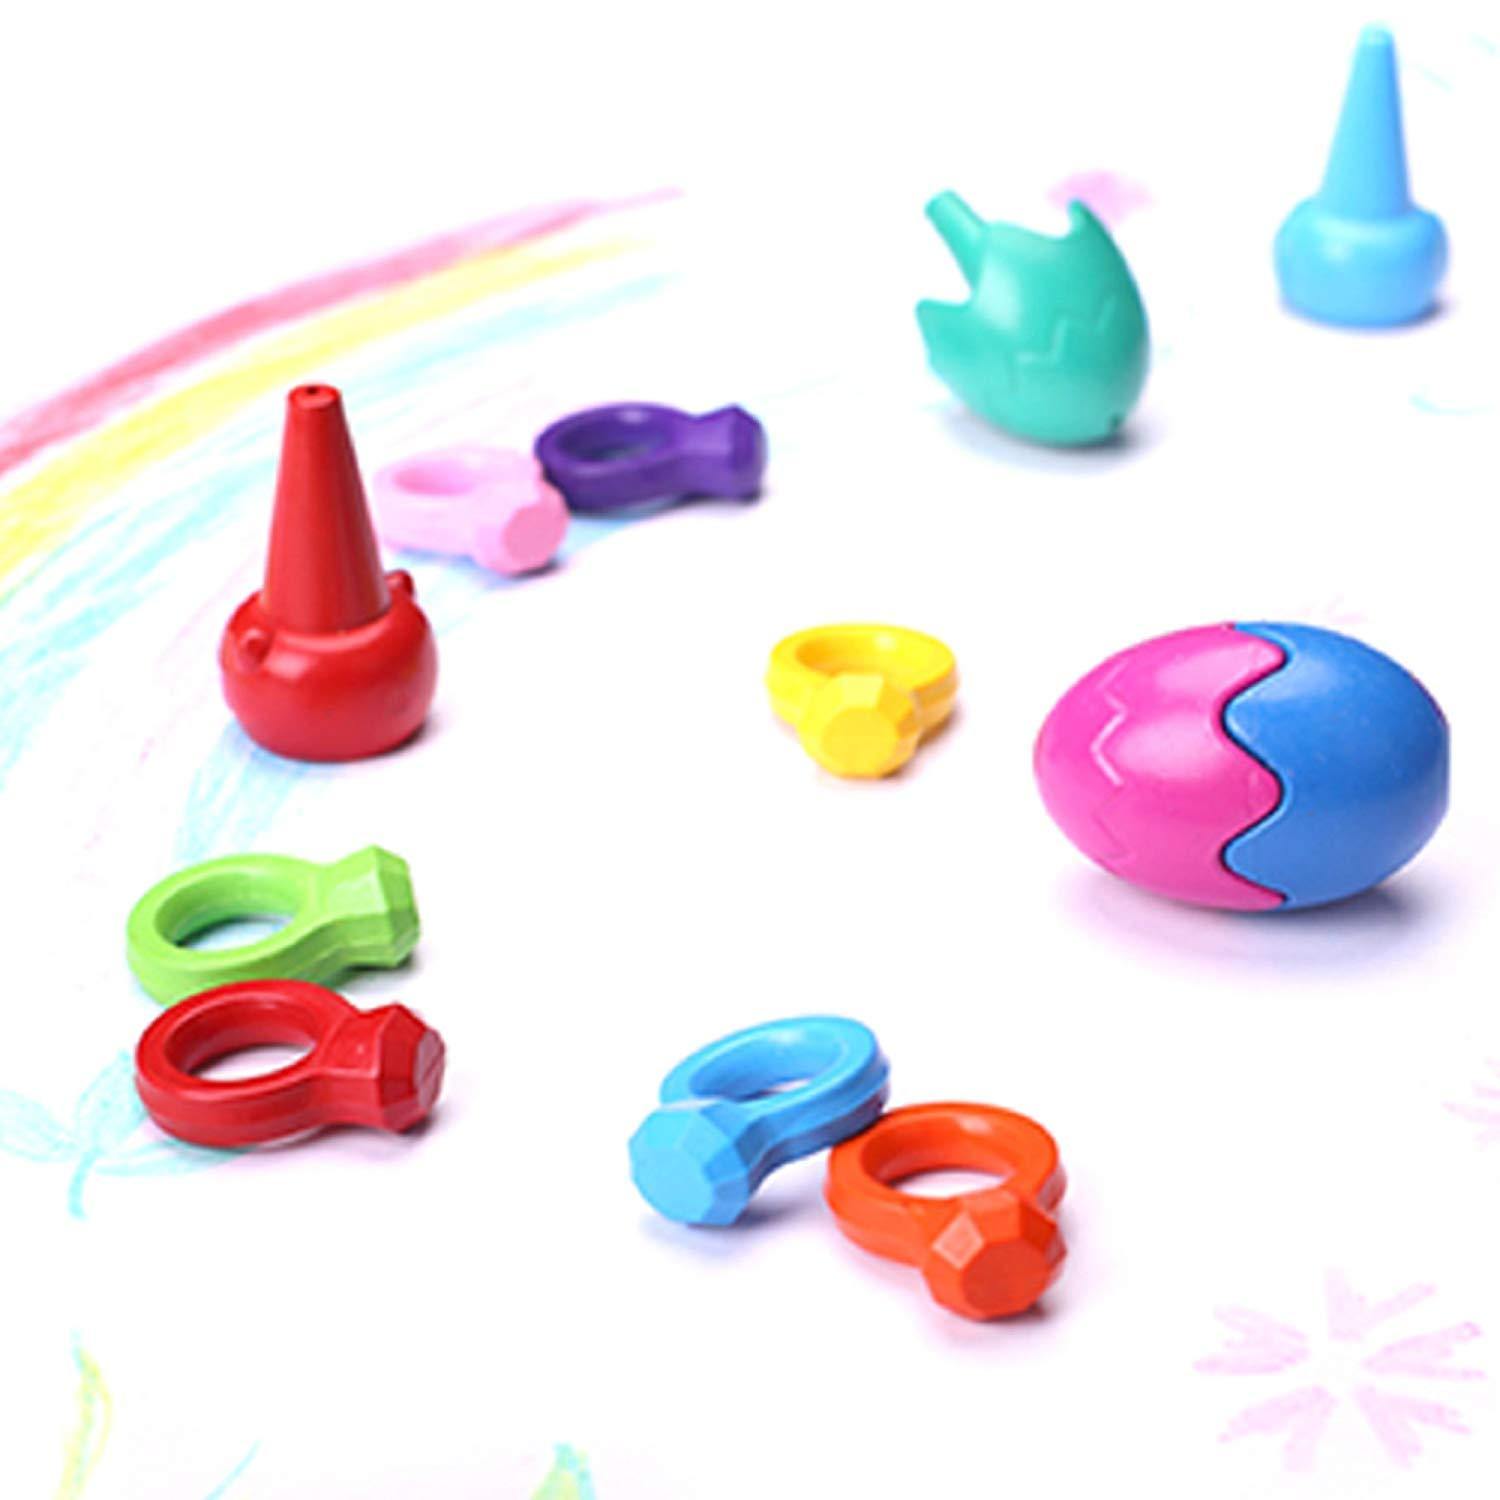 Bosonshop Toddler Crayons Pack of 9 Colors Paint Crayons Baby Diamond Ring Shaped Non Toxic Doodle Toy